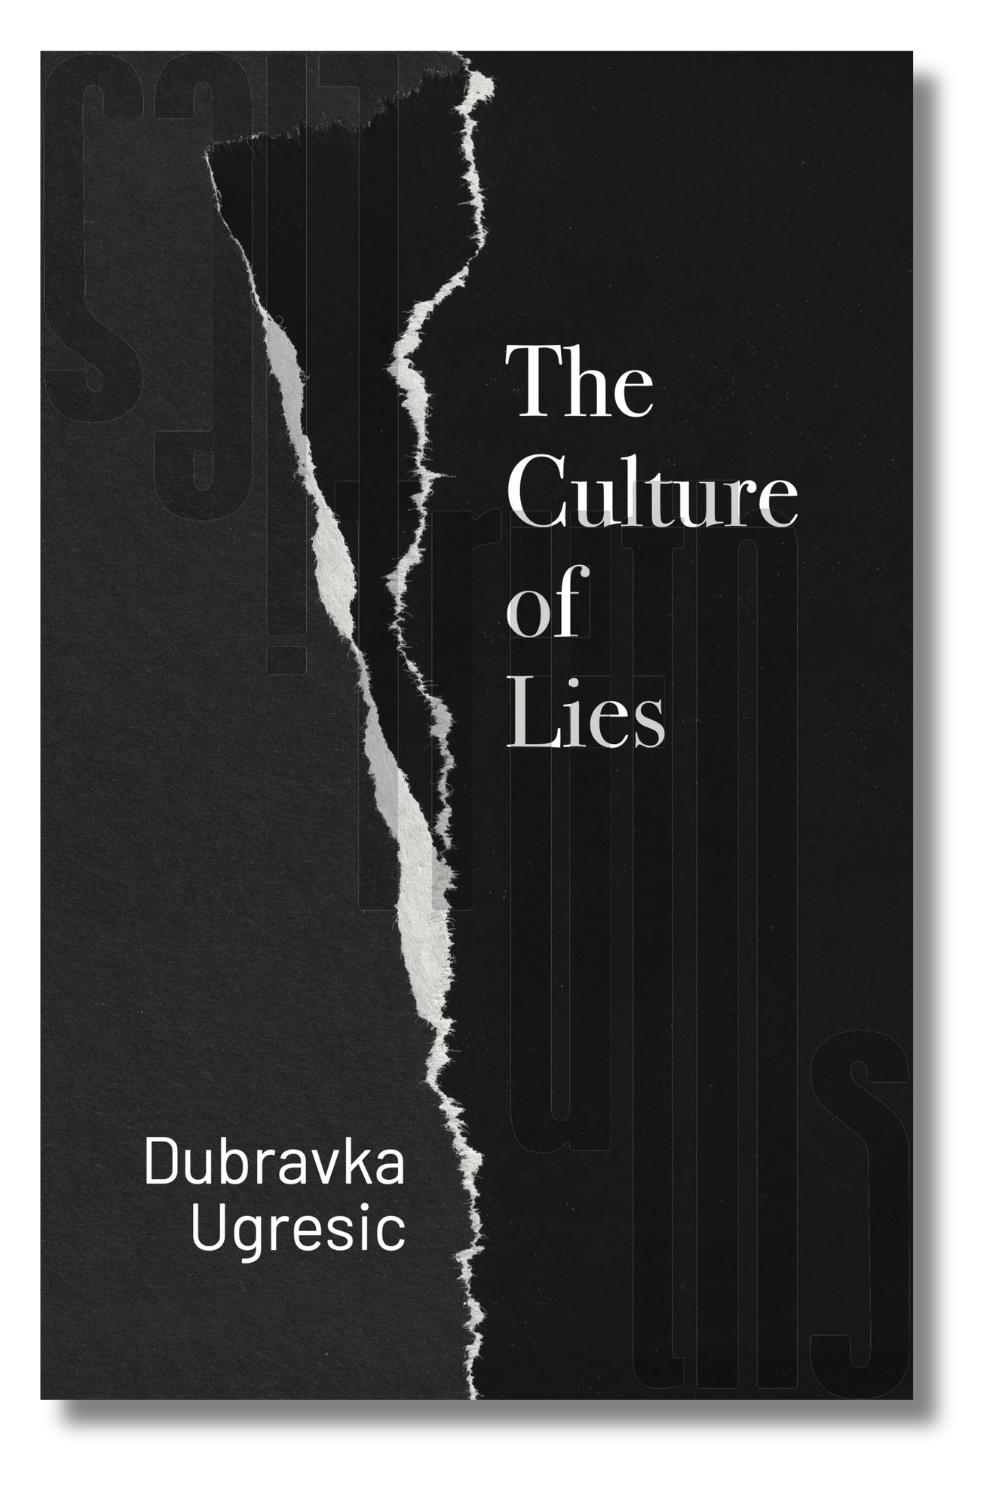 The cover of Dubravka Ugresic's "The Culture of Lies," tr. by Celia Hawkesworth